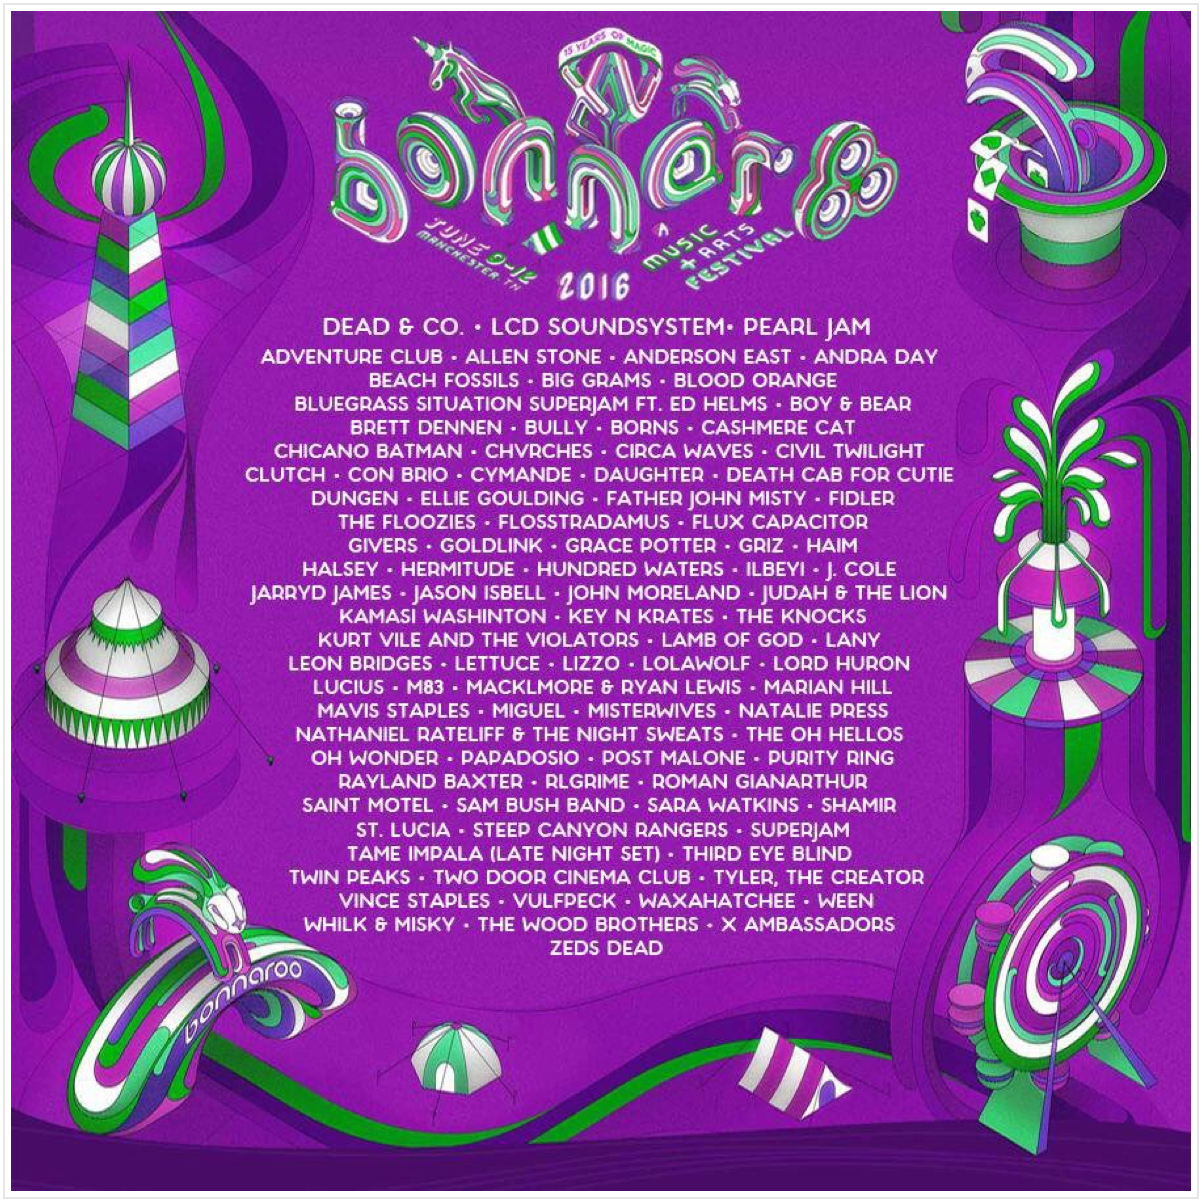 [FESTIVAL NEWS] Bonnaroo's 2016 Lineup May Have Just Leaked | The Sights And Sounds